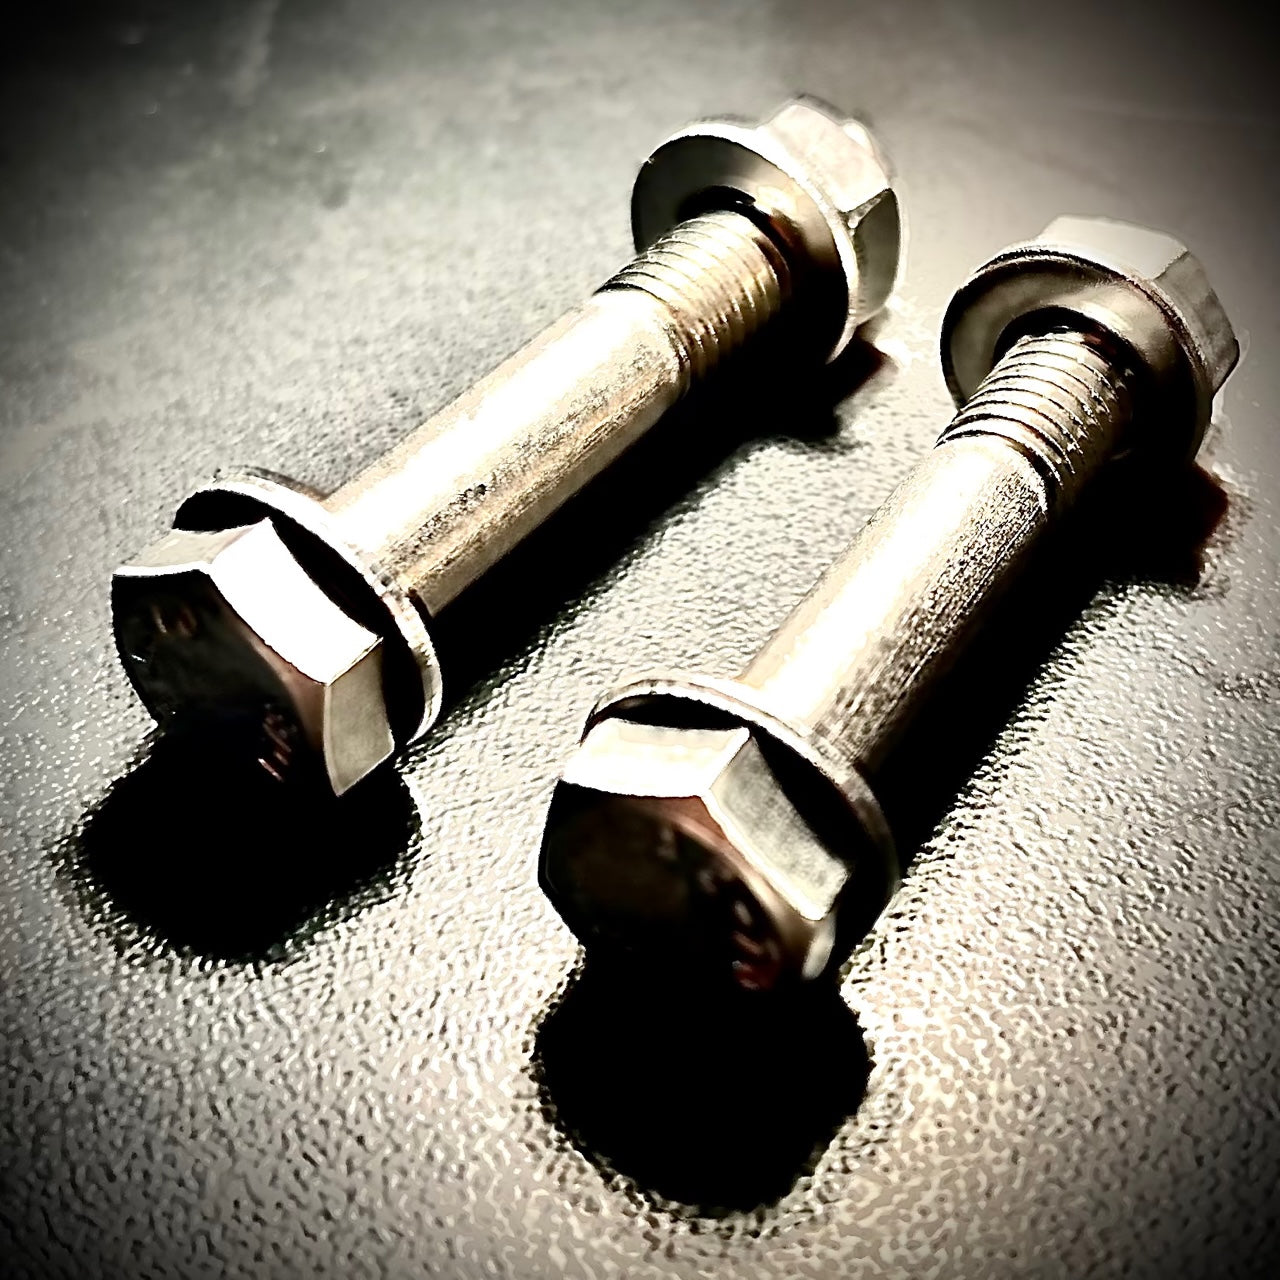 M20 x Under 130mm Hex Bolt plus Nut and Washers A2/ 304 Stainless Steel DIN 931 - Fixaball Ltd. Fixings and Fasteners UK